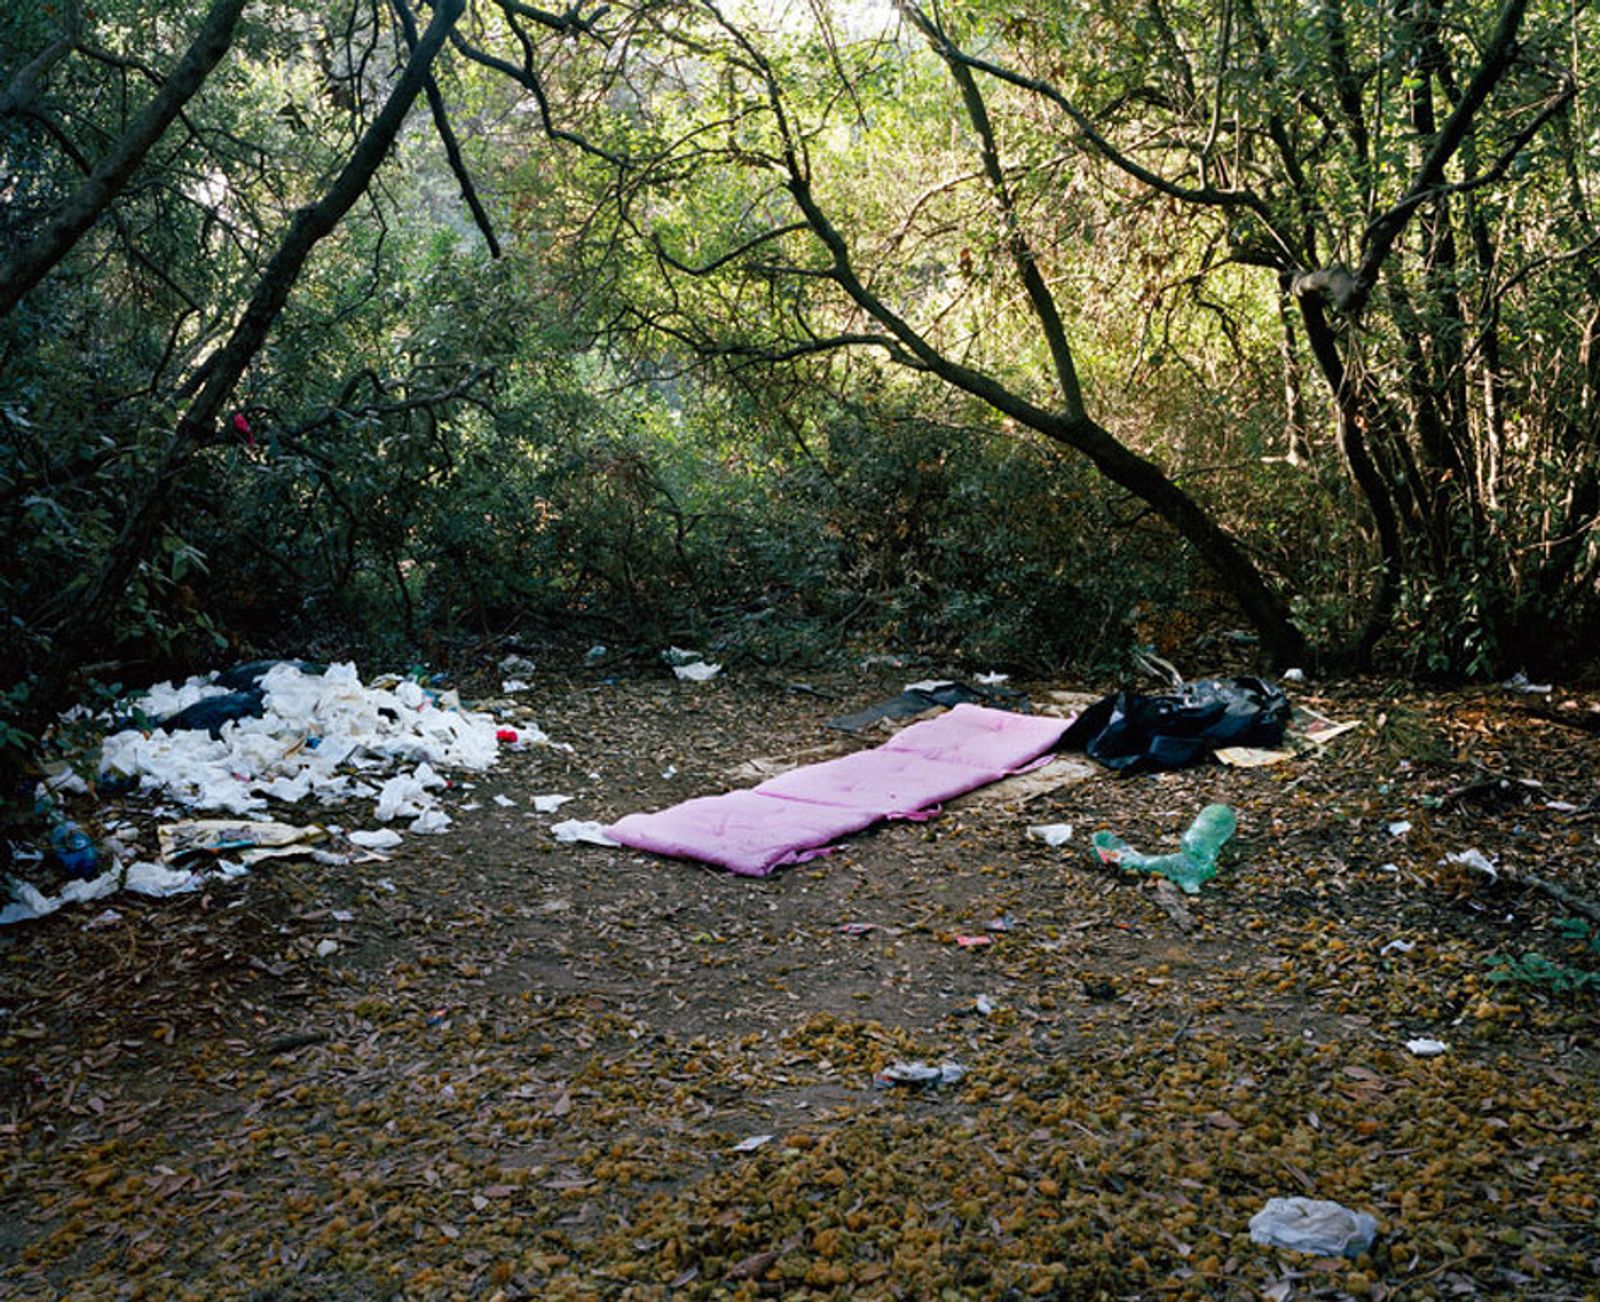 © Paolo Patrizi - A pink mat used by sex workers in a wooded area on the outskirts of Rome